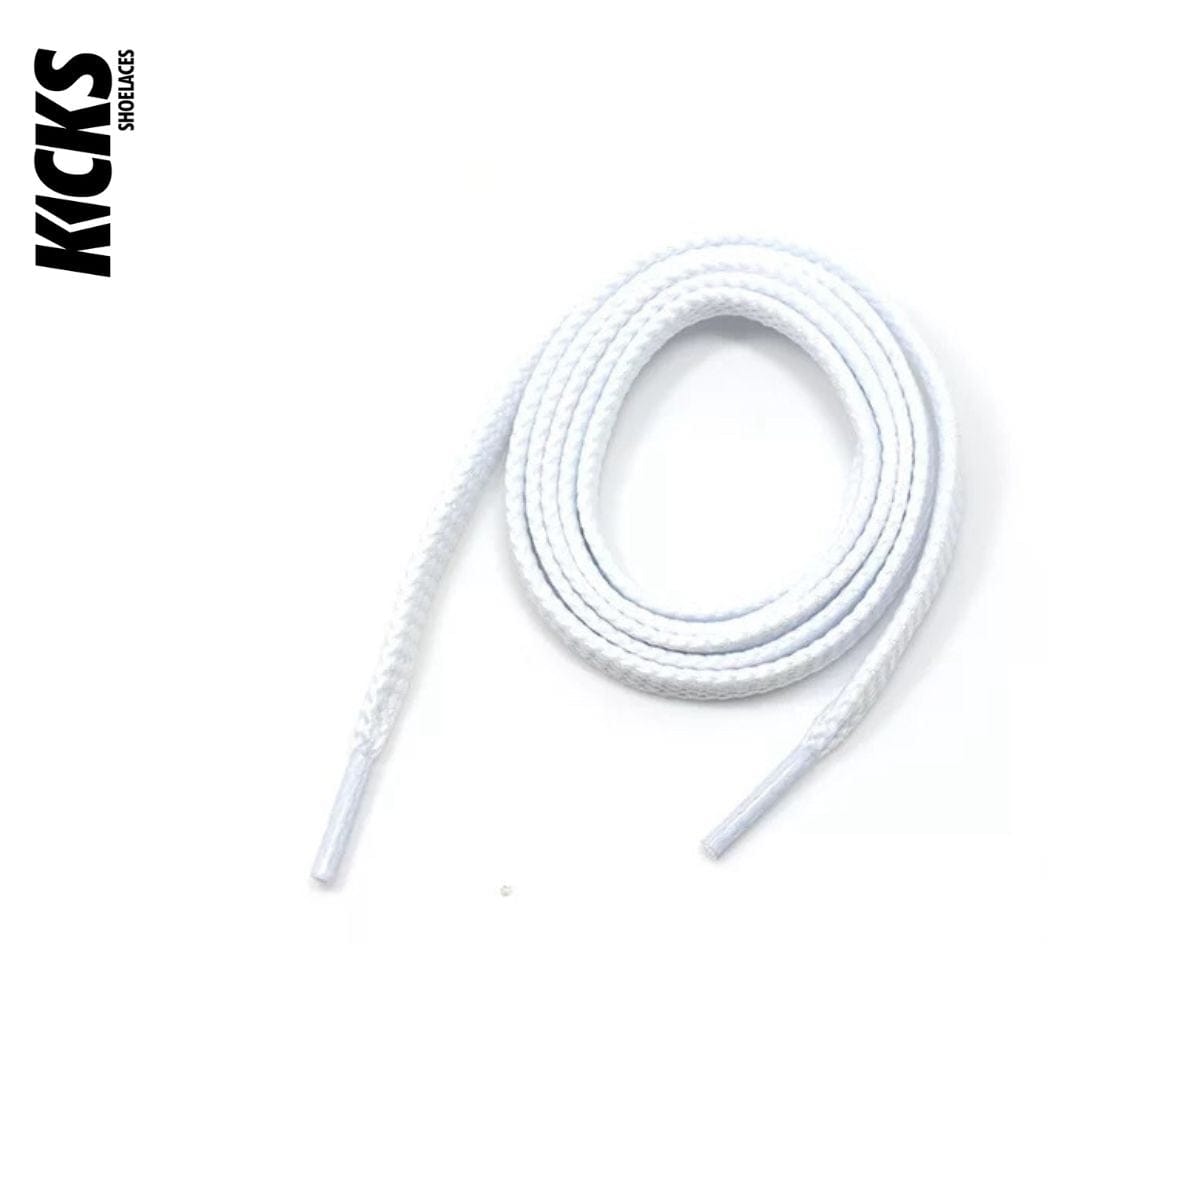 White Replacement New Balance Laces for New Balance Shoes by Kicks Shoelaces